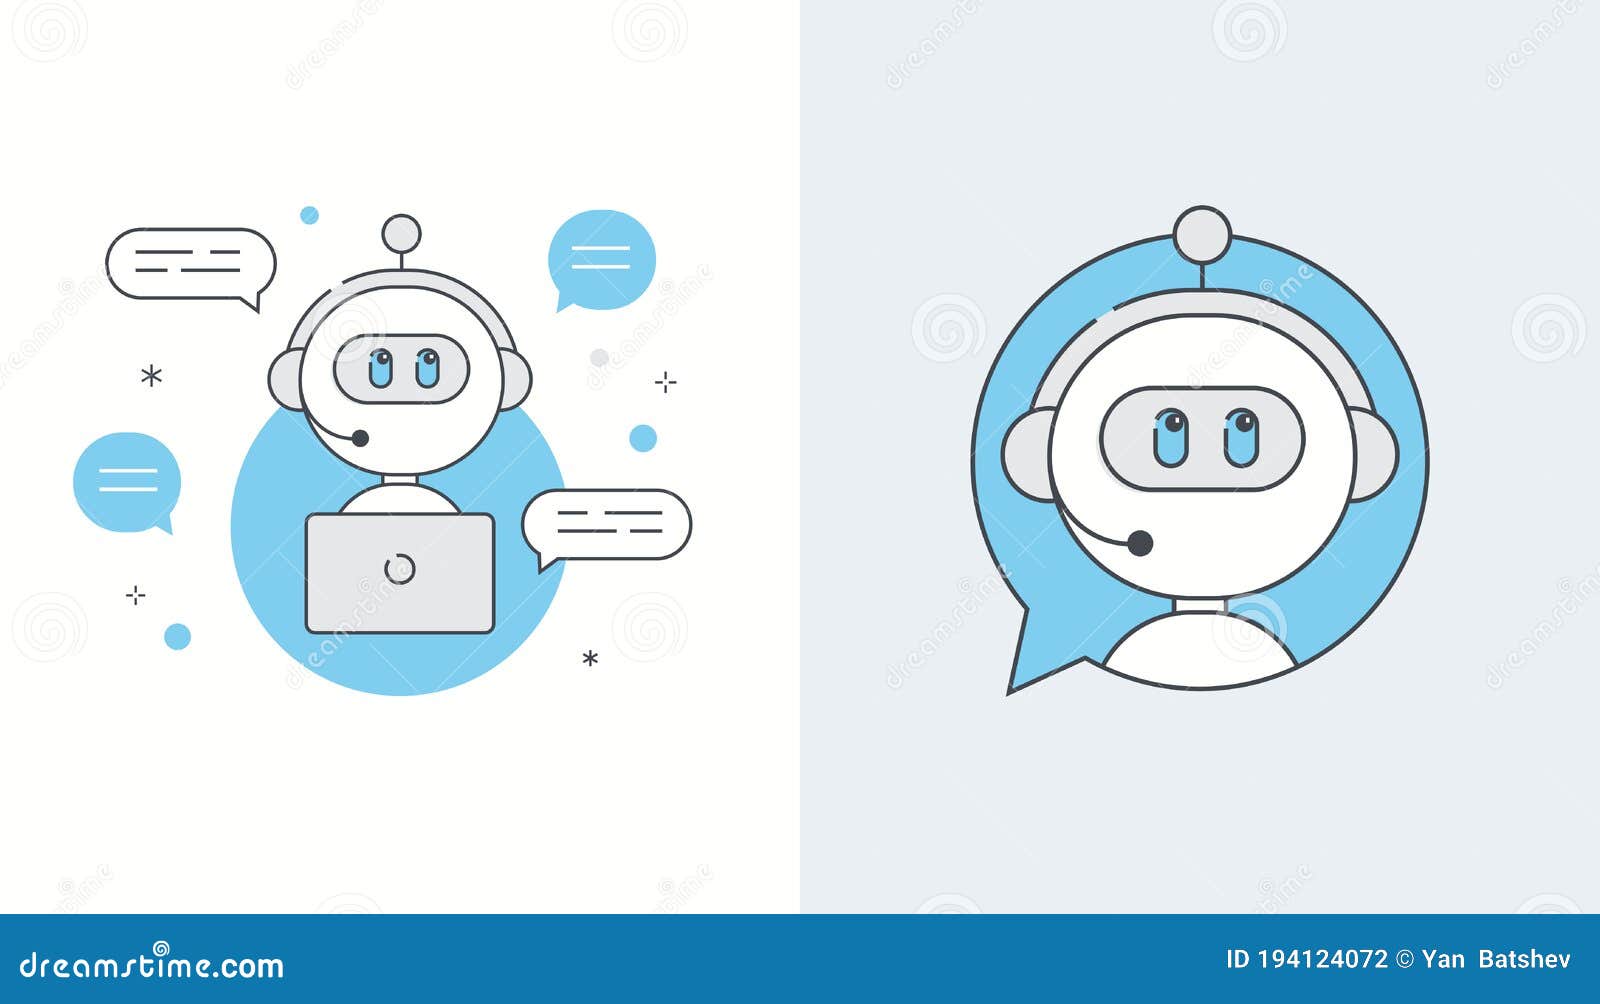 Chat bot icon with artificial intelligence. Illustration of a cute